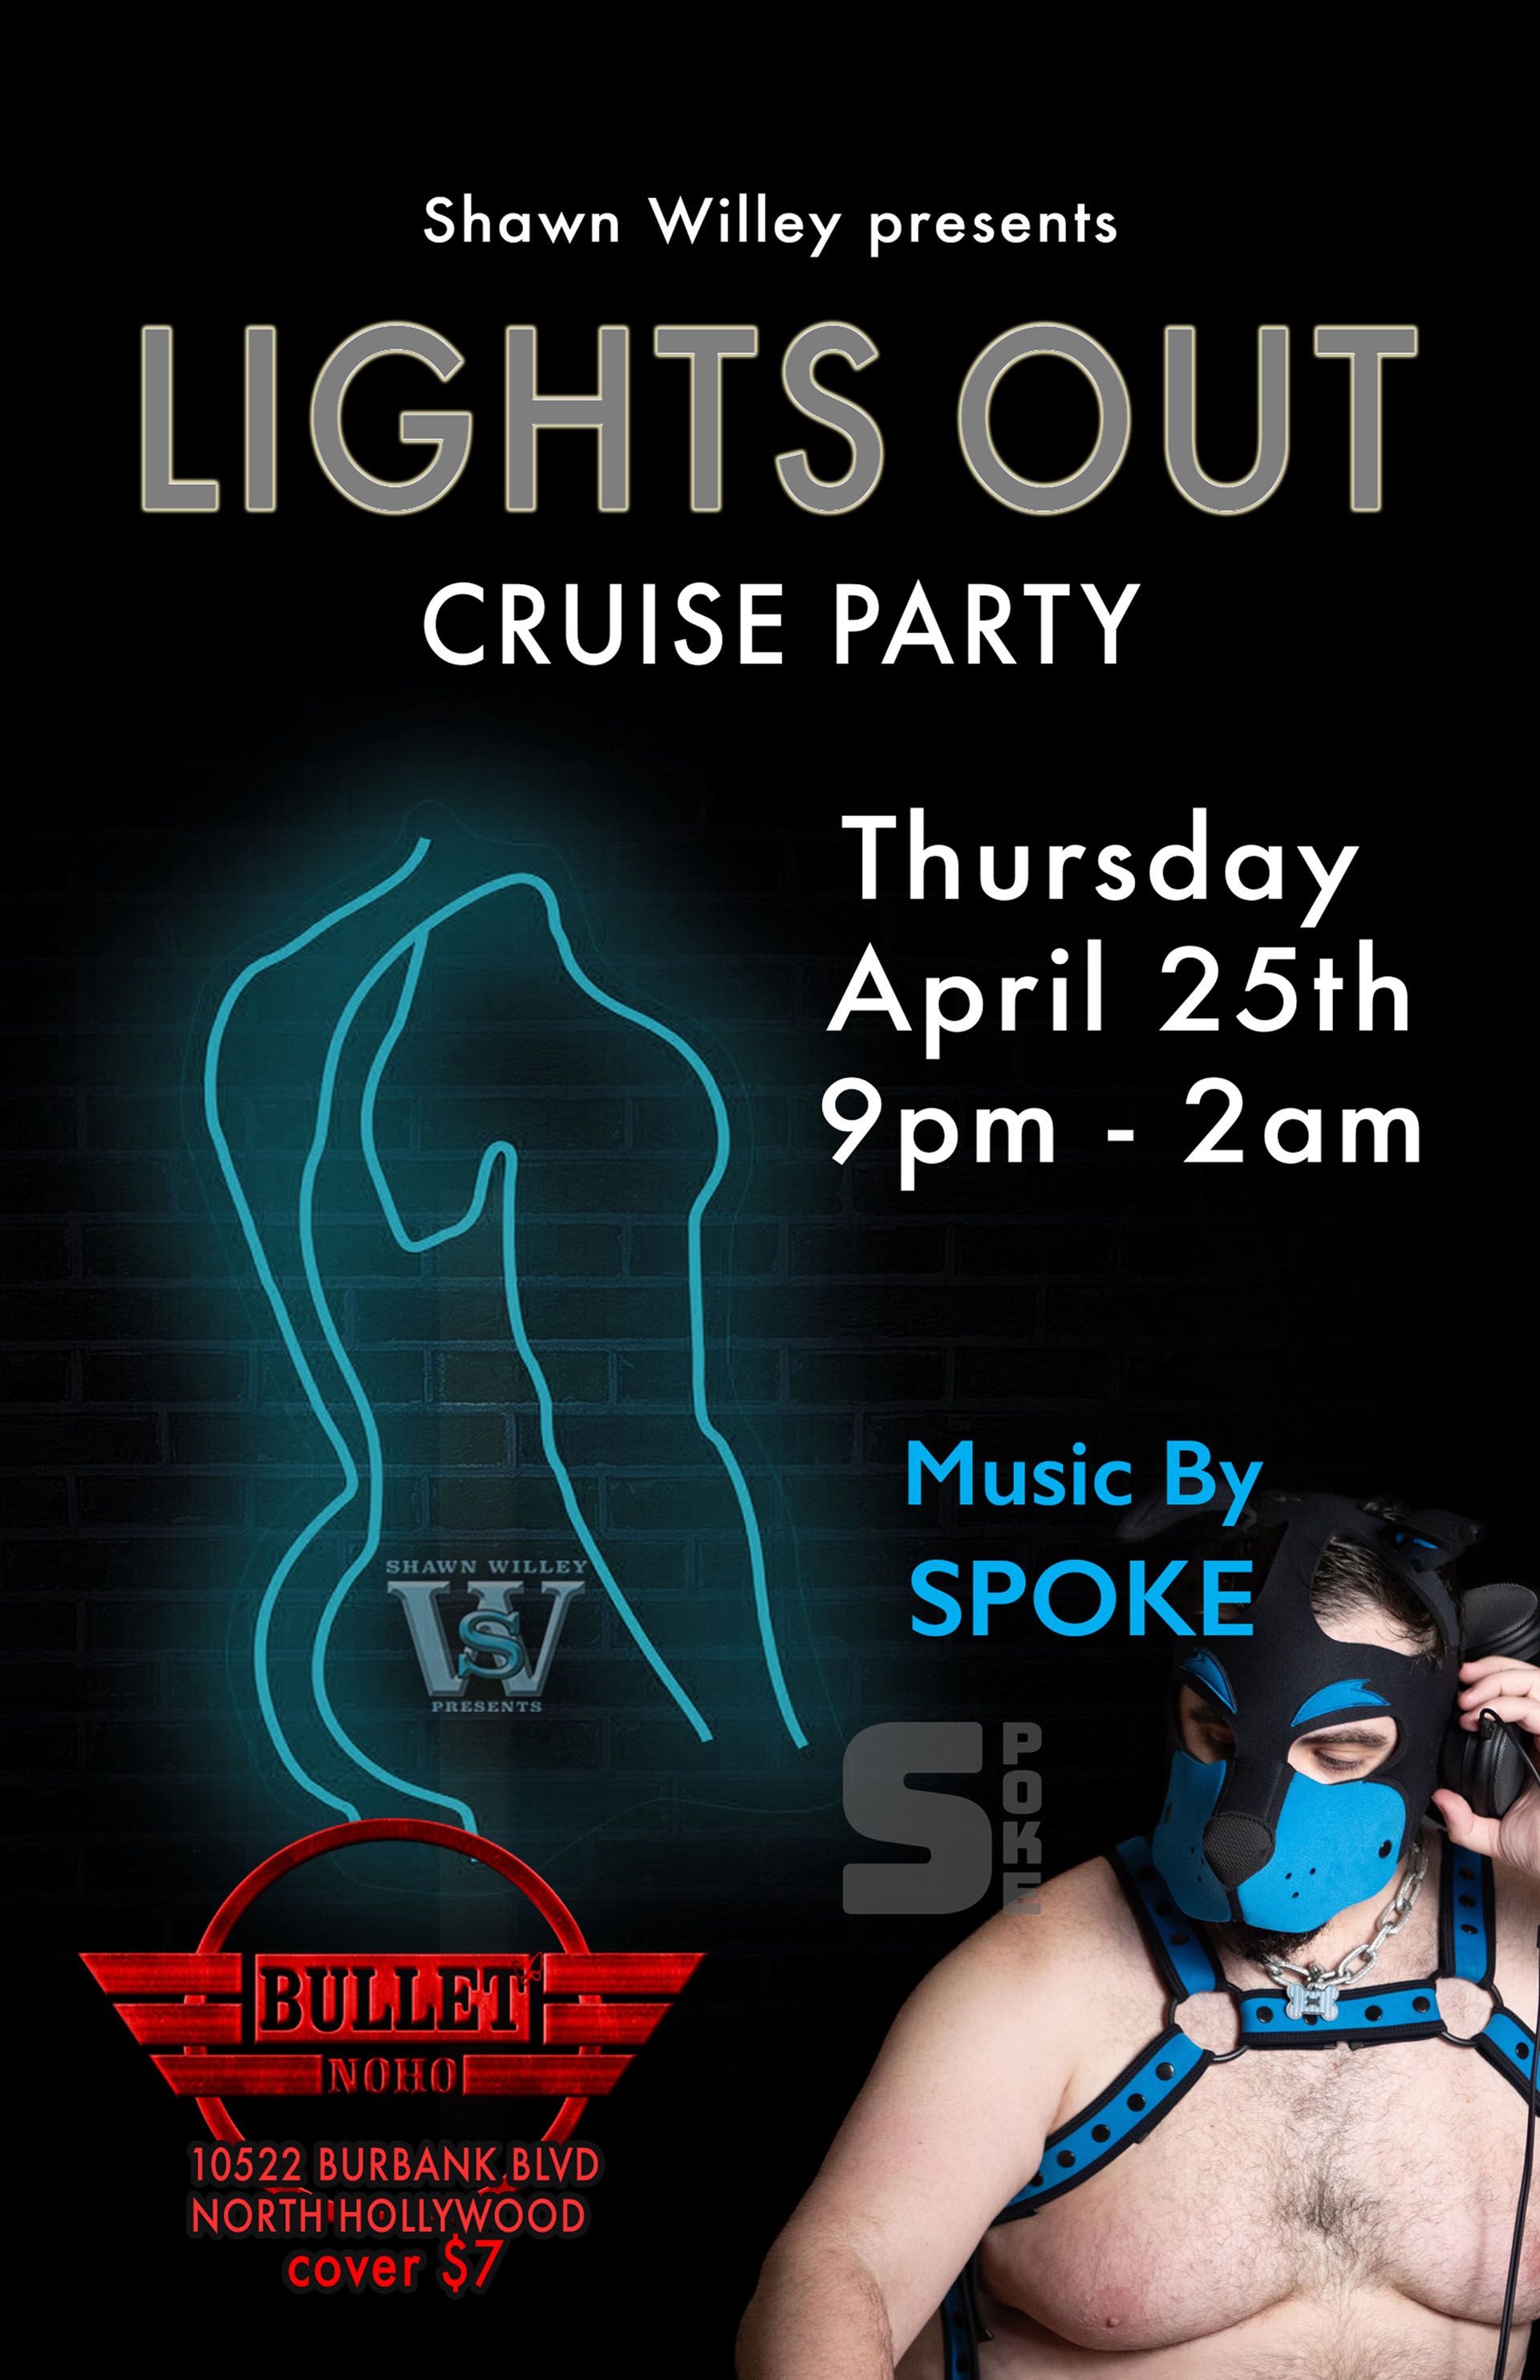 THE BULLET BAR Presents SHAWN WILLEY LIGHTS OUT CRUISE PARTY: Thursday, 04/25/24, 9:00 PM to 2:00 AM. Featuring DJ SPOKE. $7 cover.